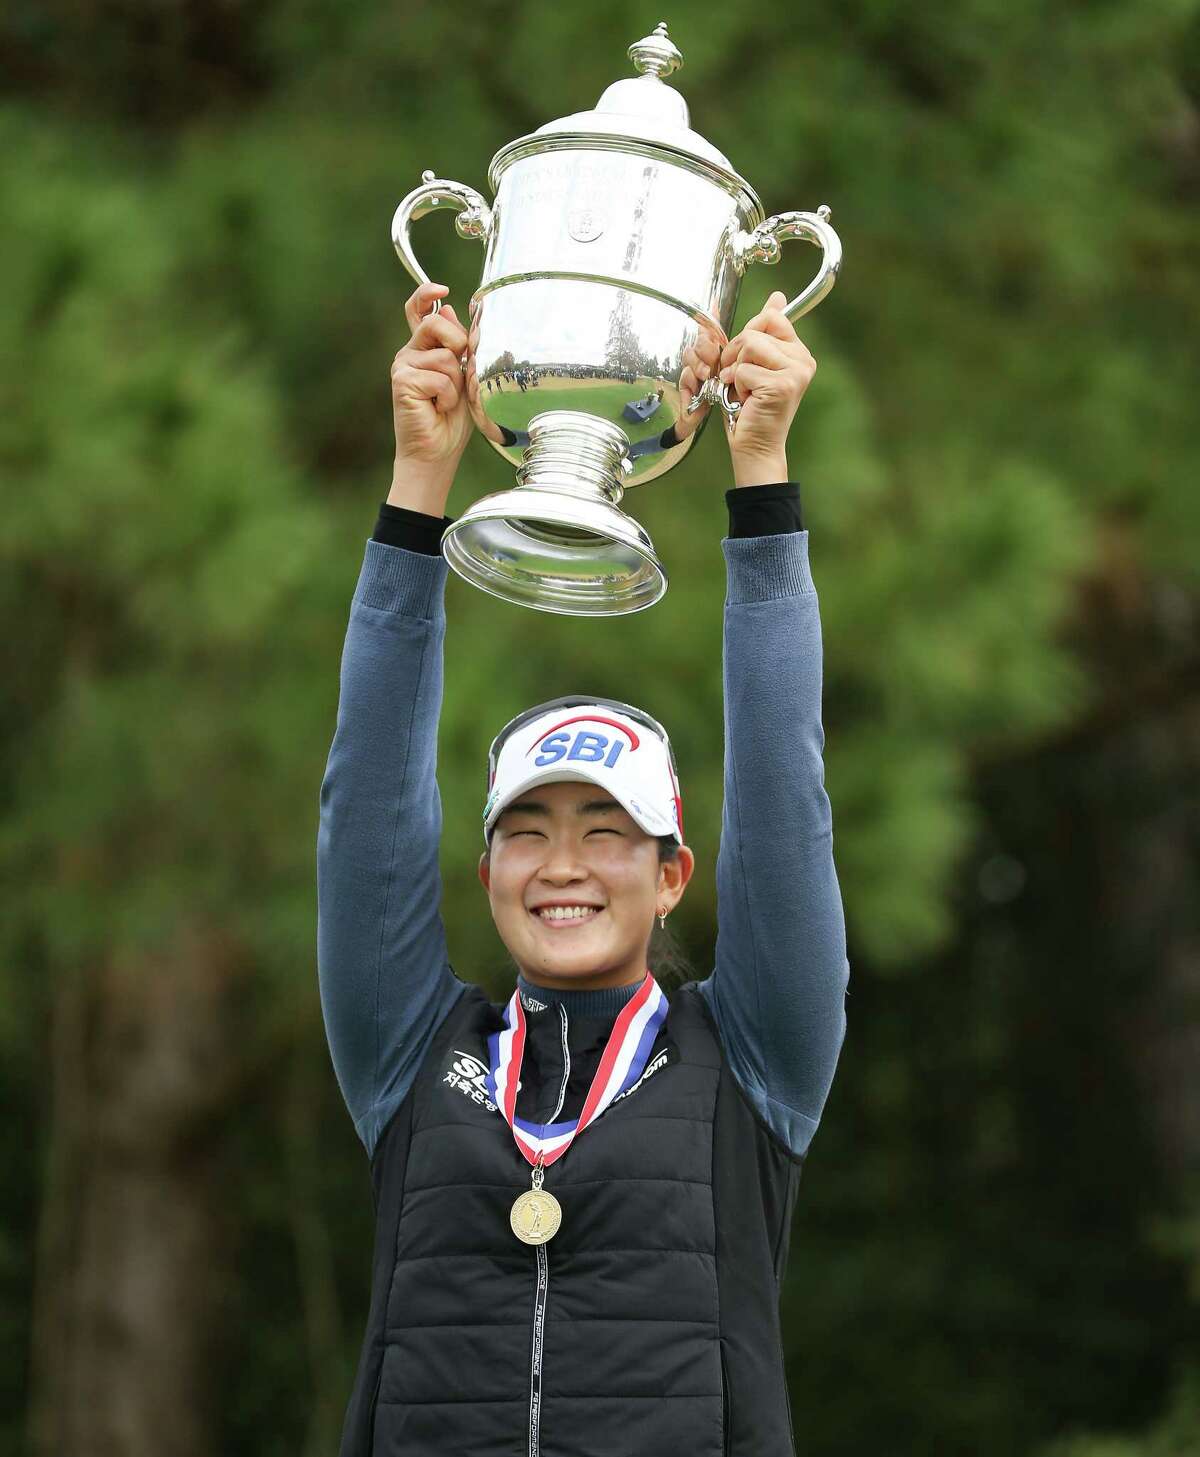 A Lim Kim of Korea holds up the Harton S. Semple trophy after winning the 75th Annual U.S. Women's Open at Champions Golf Club in Houston on Monday, Dec. 14, 2020.